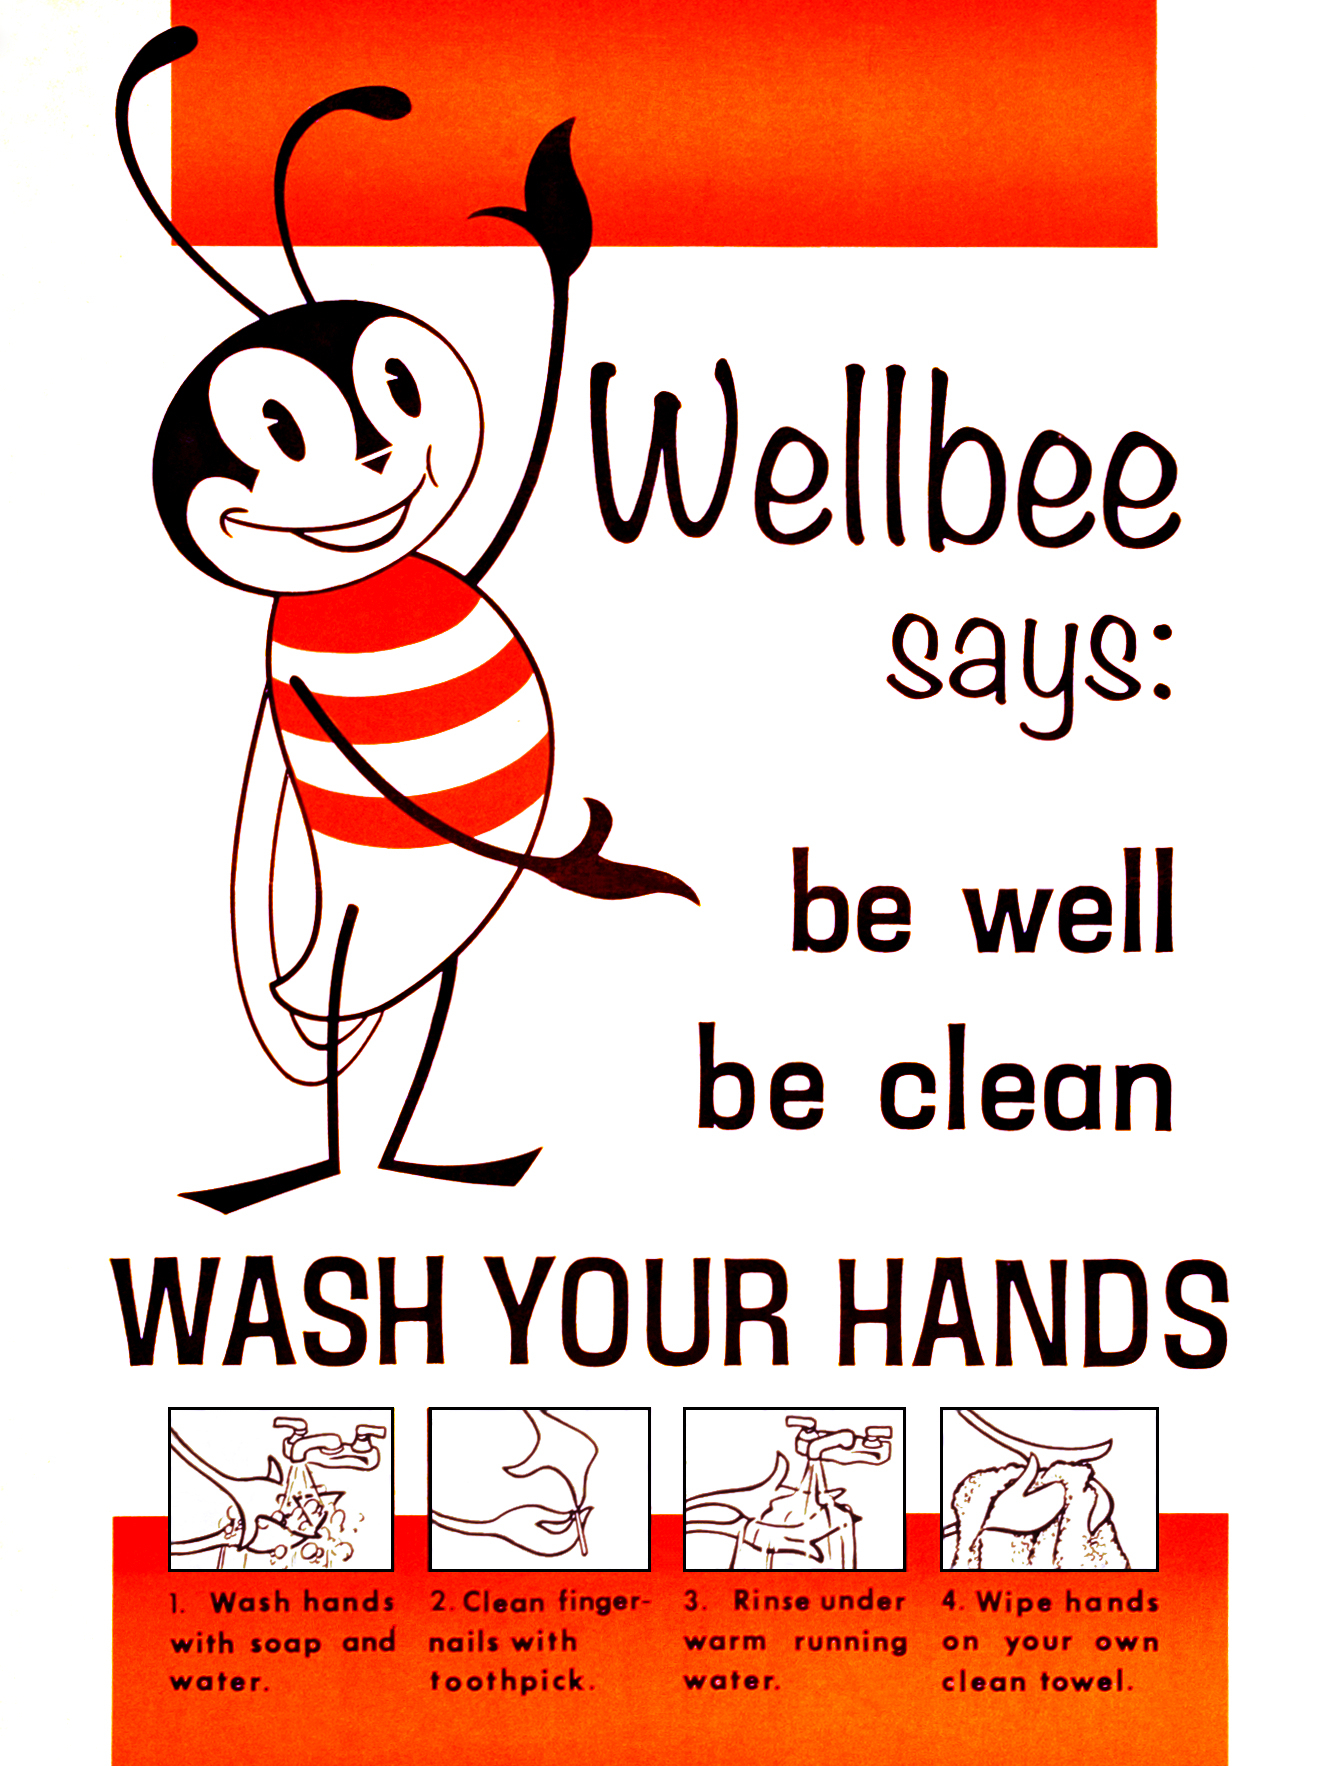 File:wash Your Hands Poster Cdc - Wellbee - Wikimedia Commons - Free Printable Hand Washing Posters